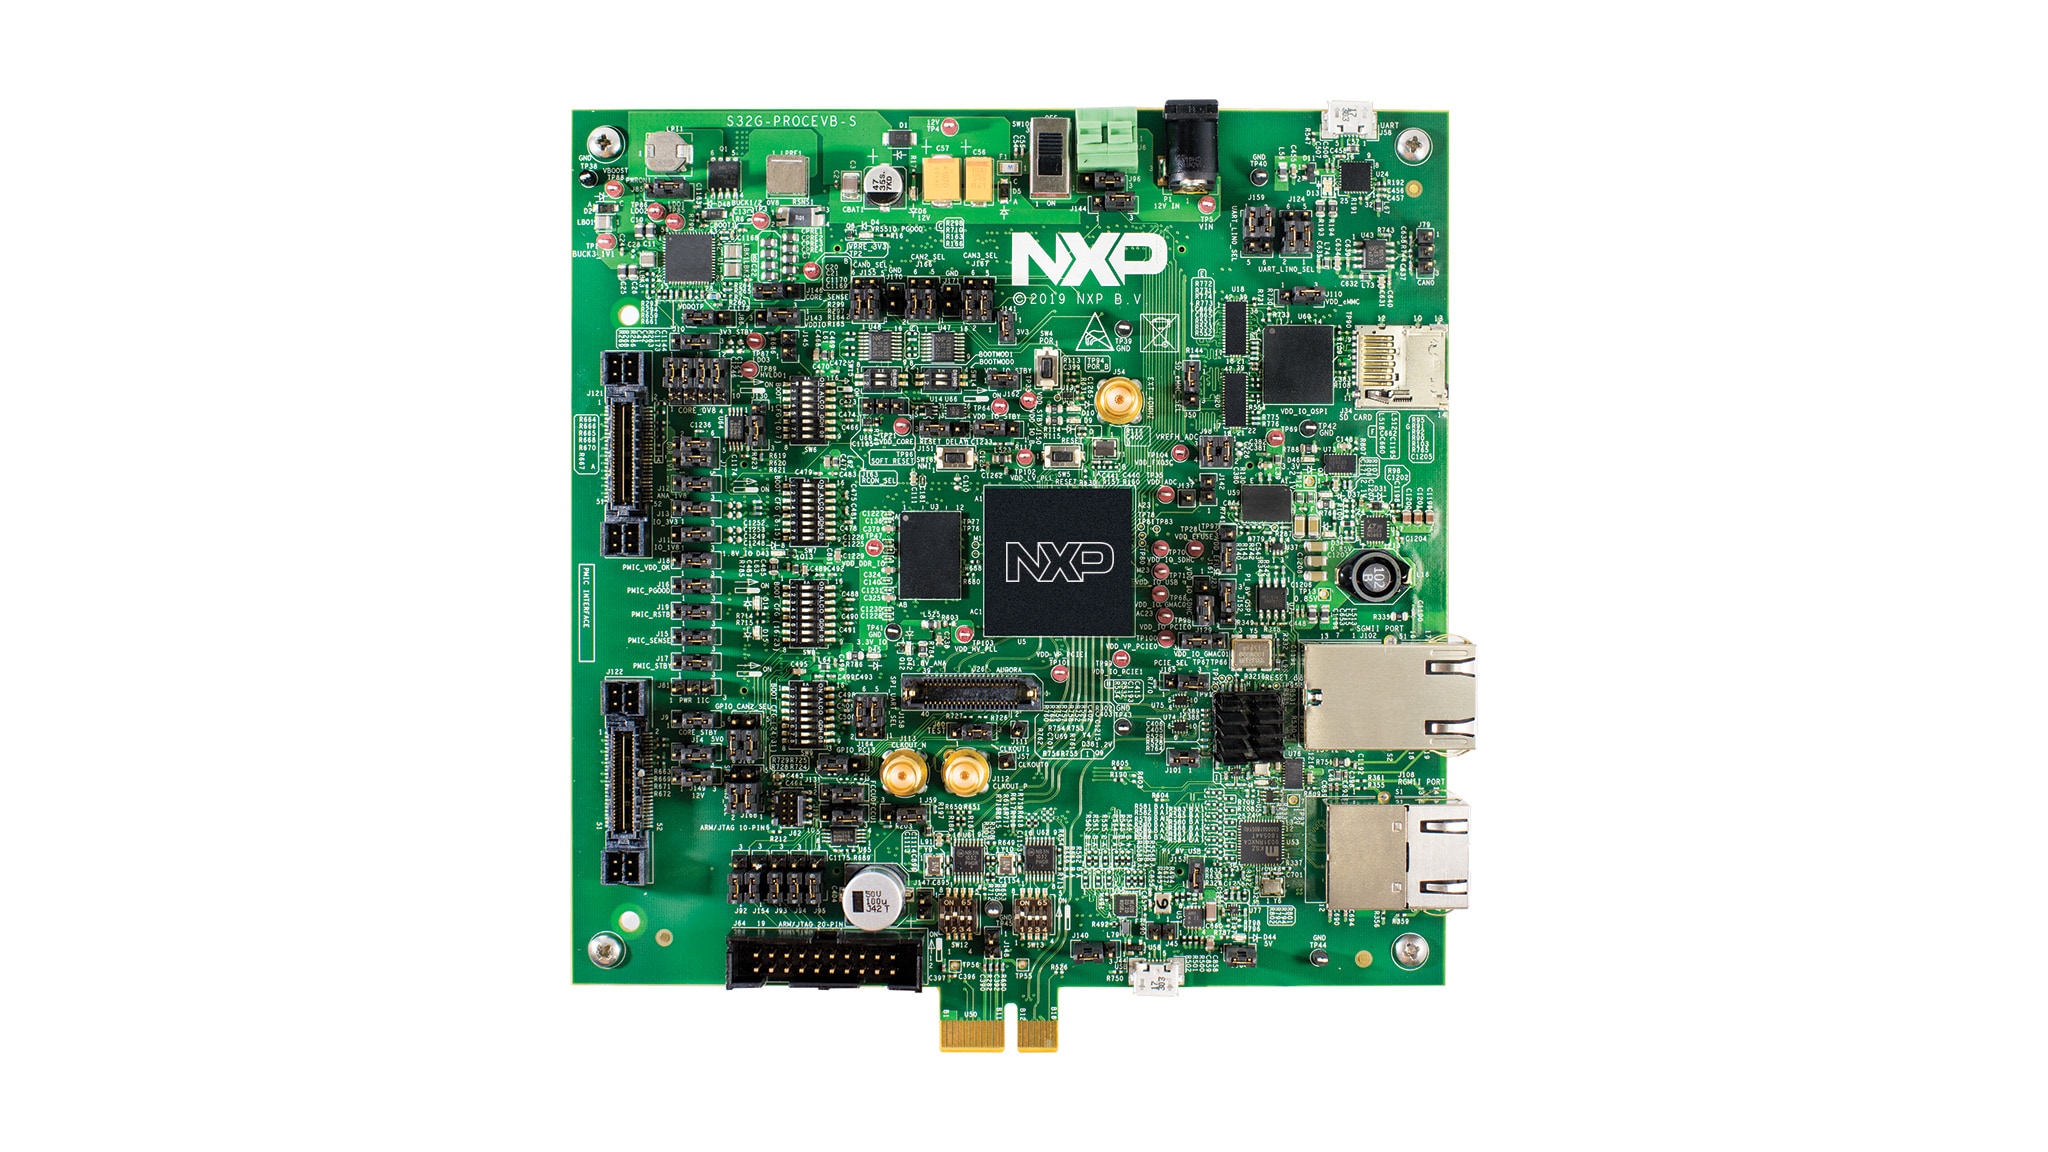 S32G2 Vehicle Networking Evaluation Board